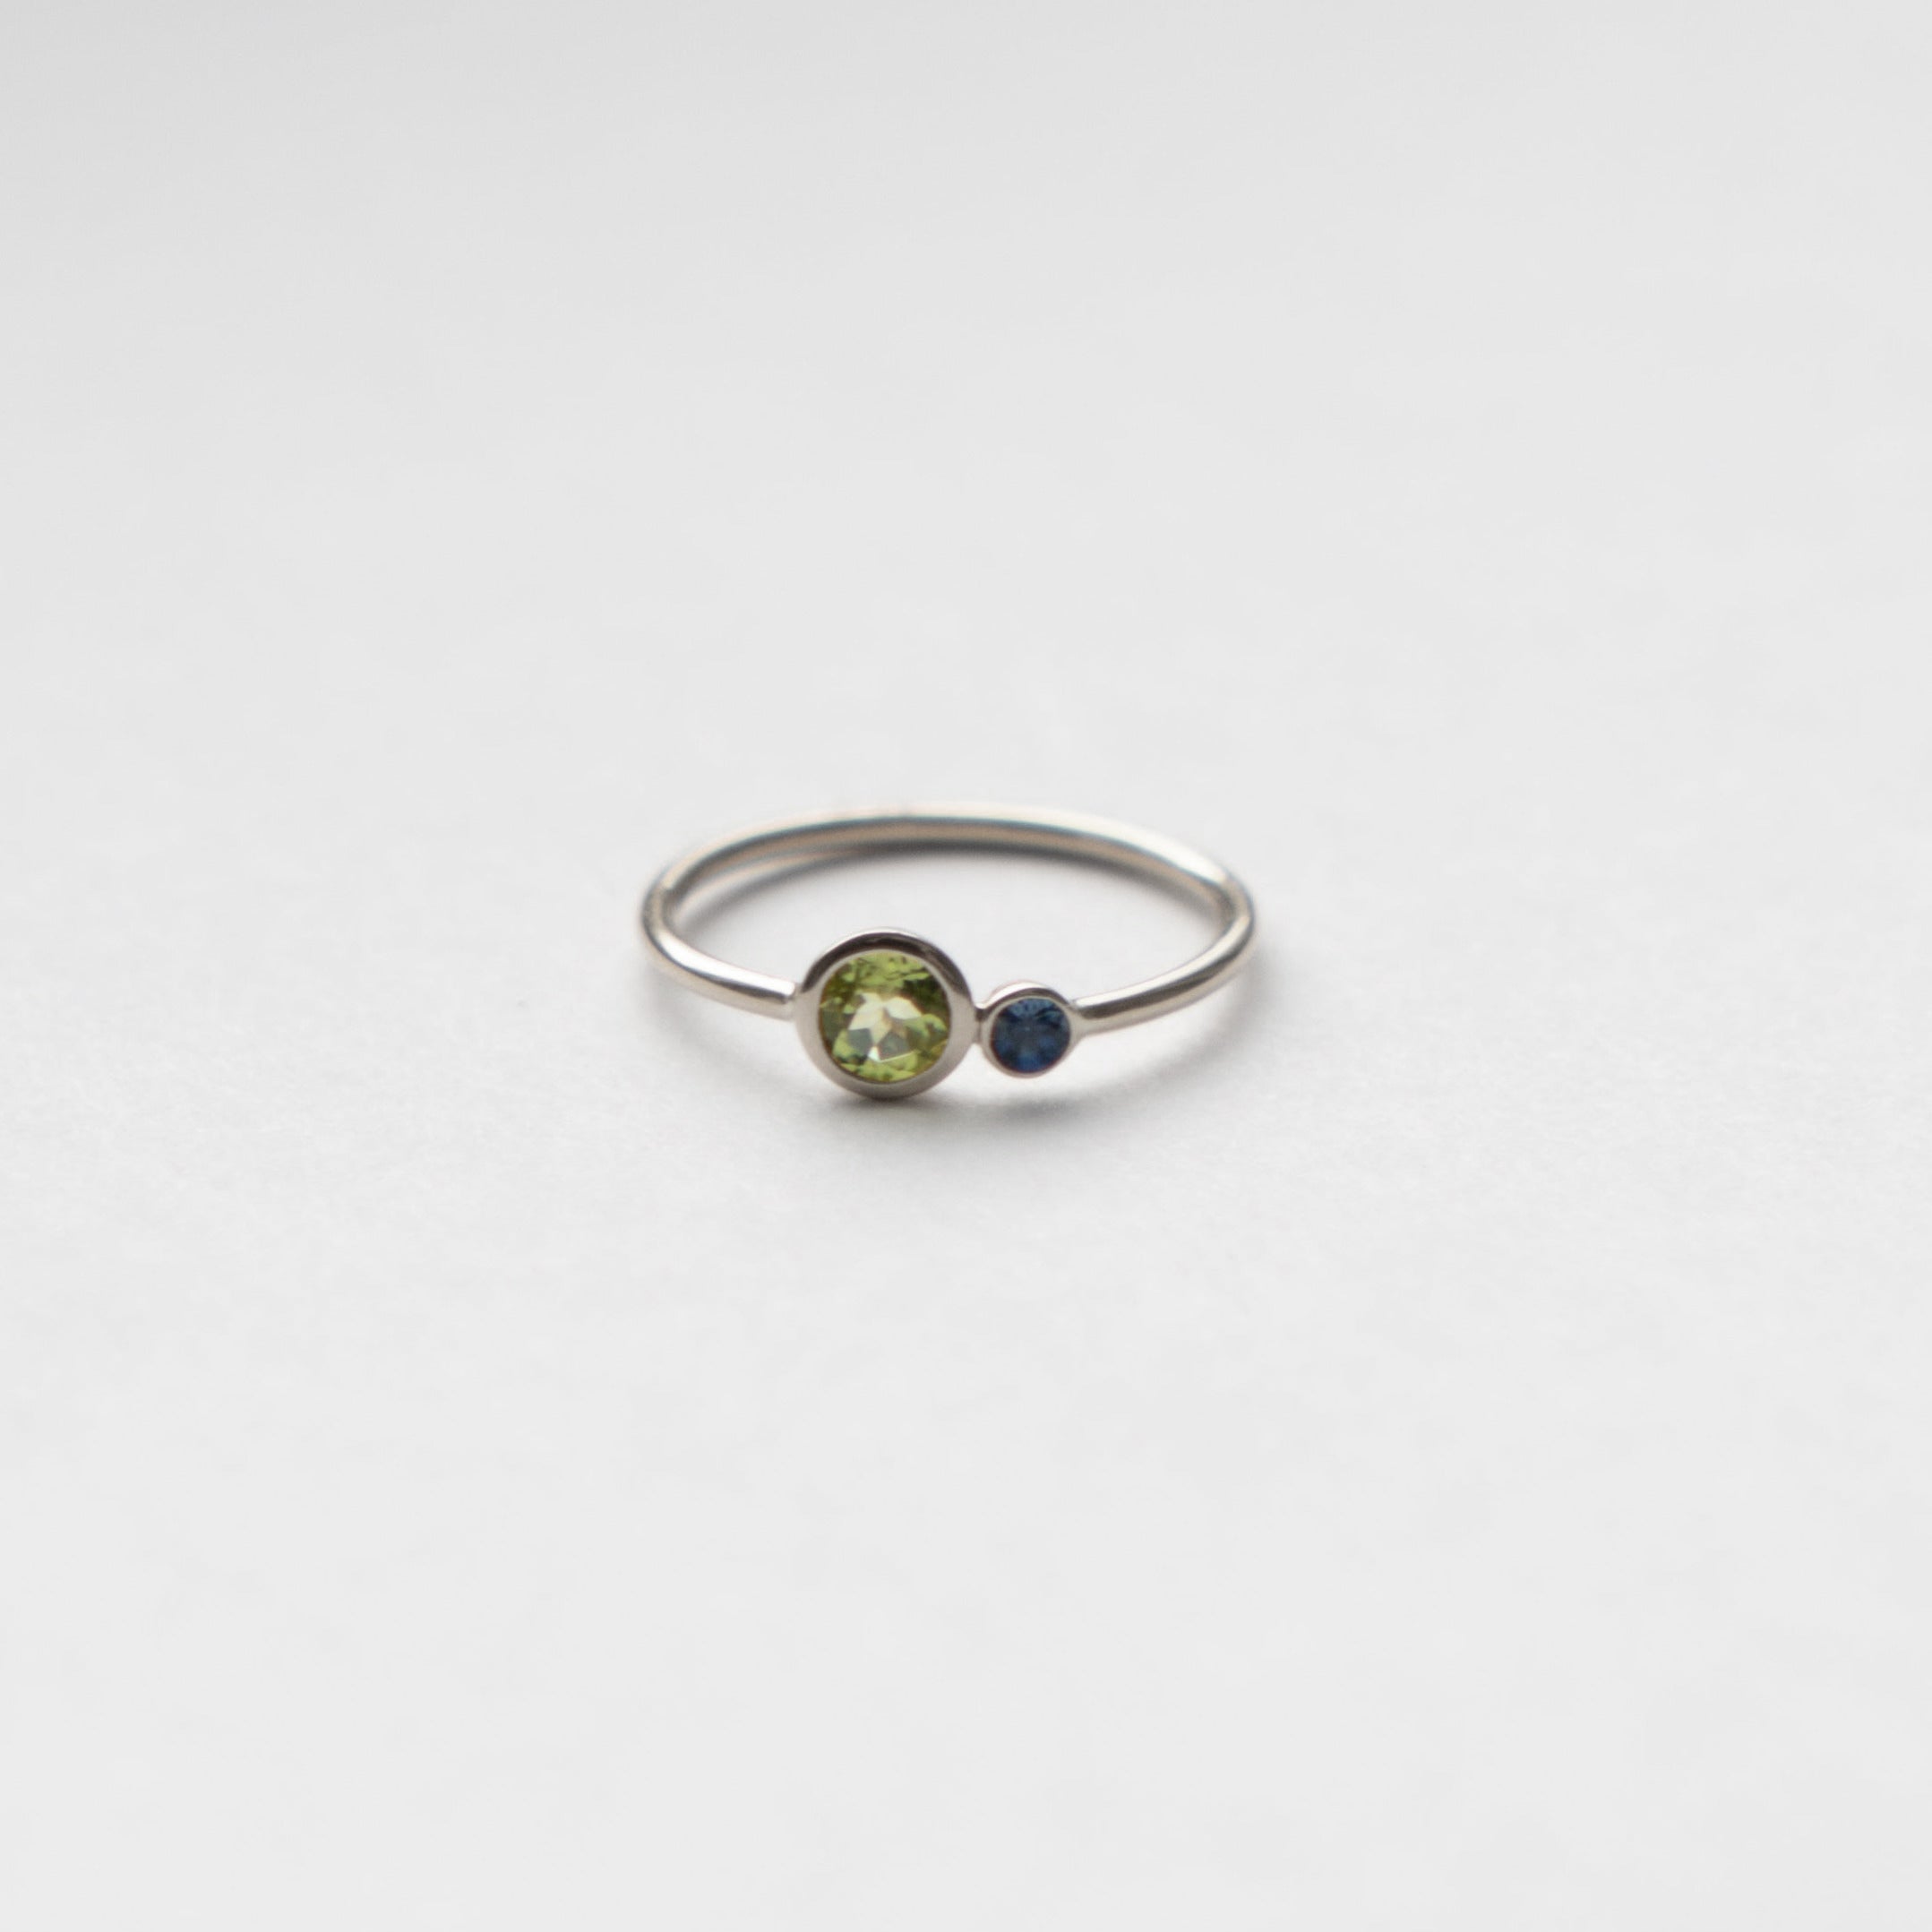 Kiki nontraditional ring in 14k white gold set with peridot and sapphire